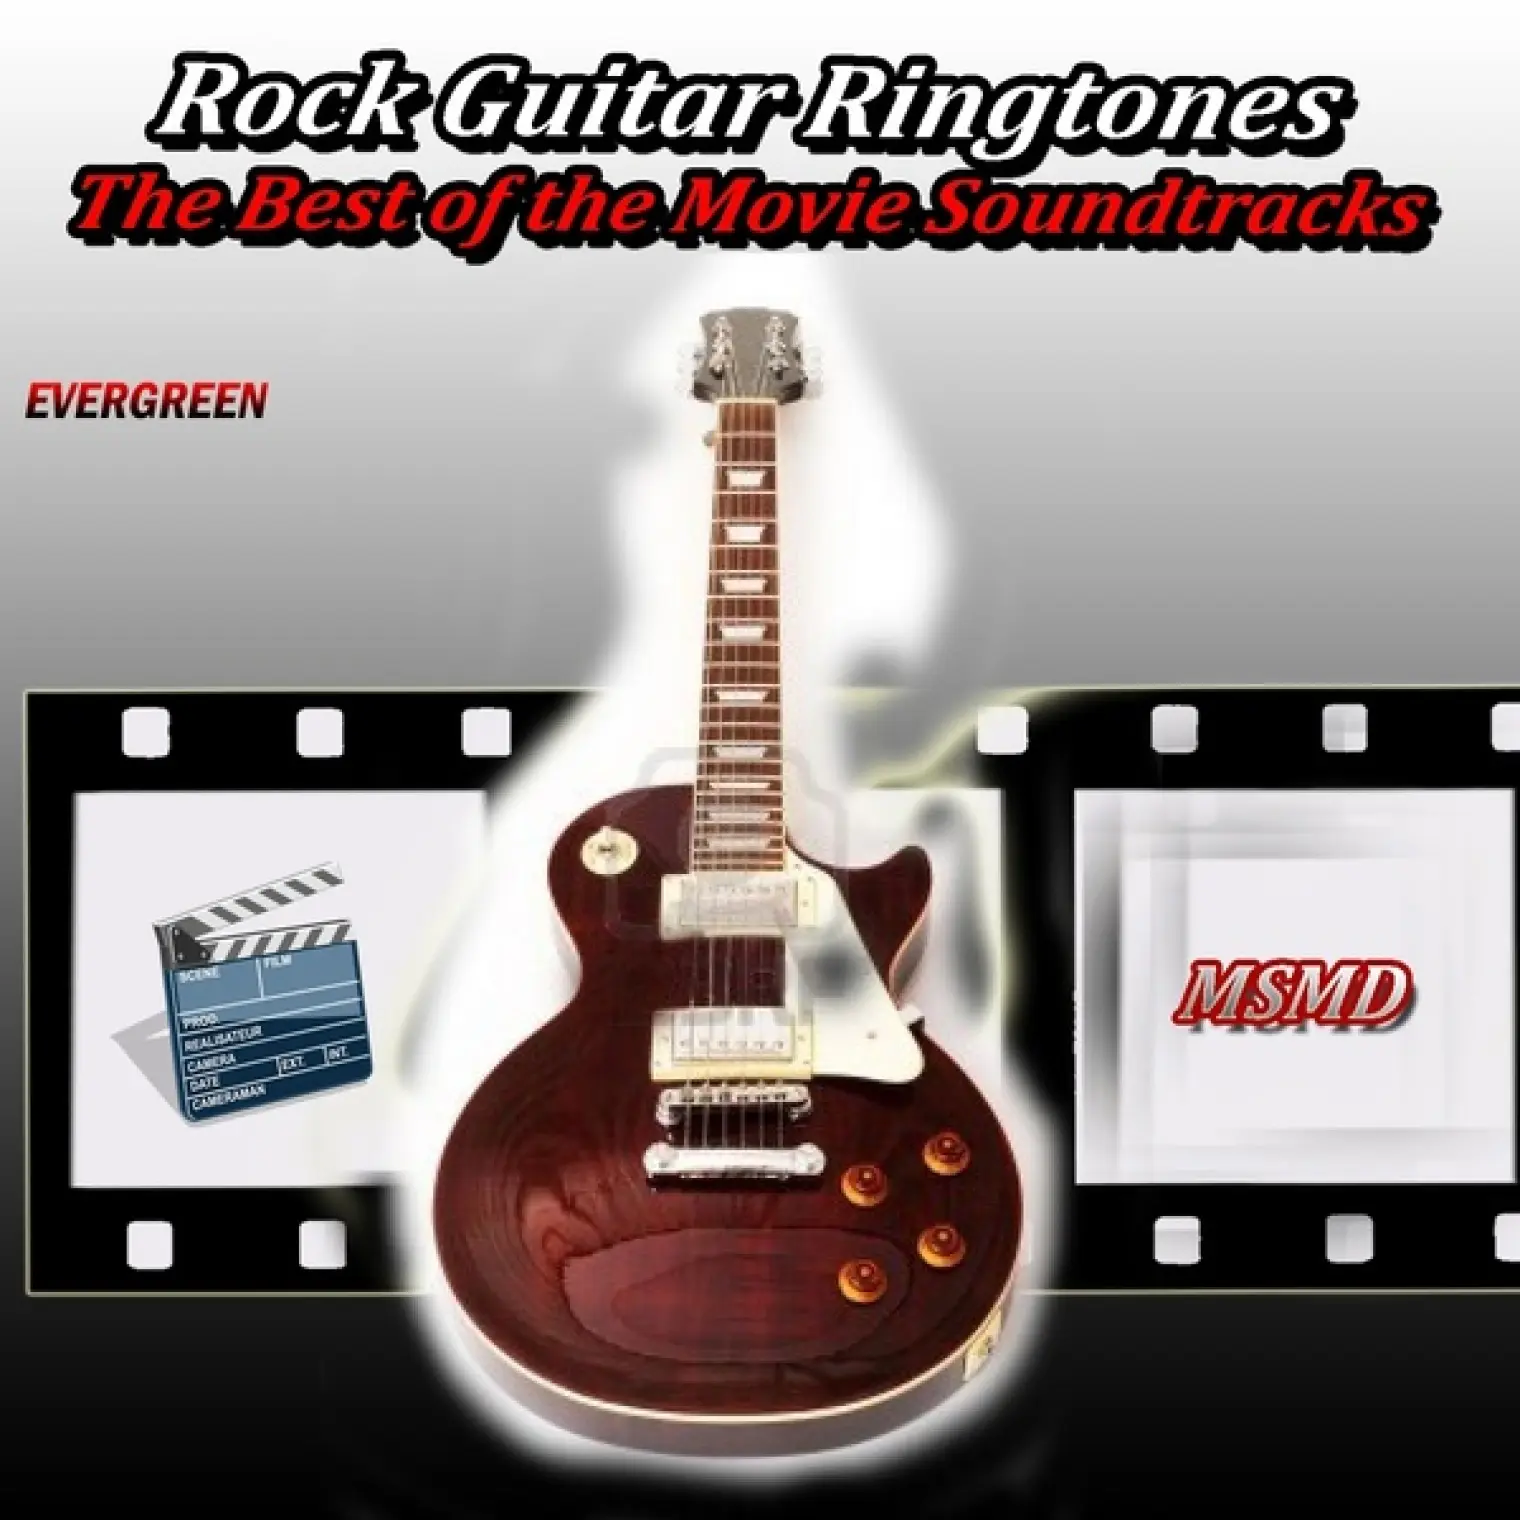 Rock Guitar Ringtones (The Best of the Movie Soundtracks Evergreen) -  Msmd 